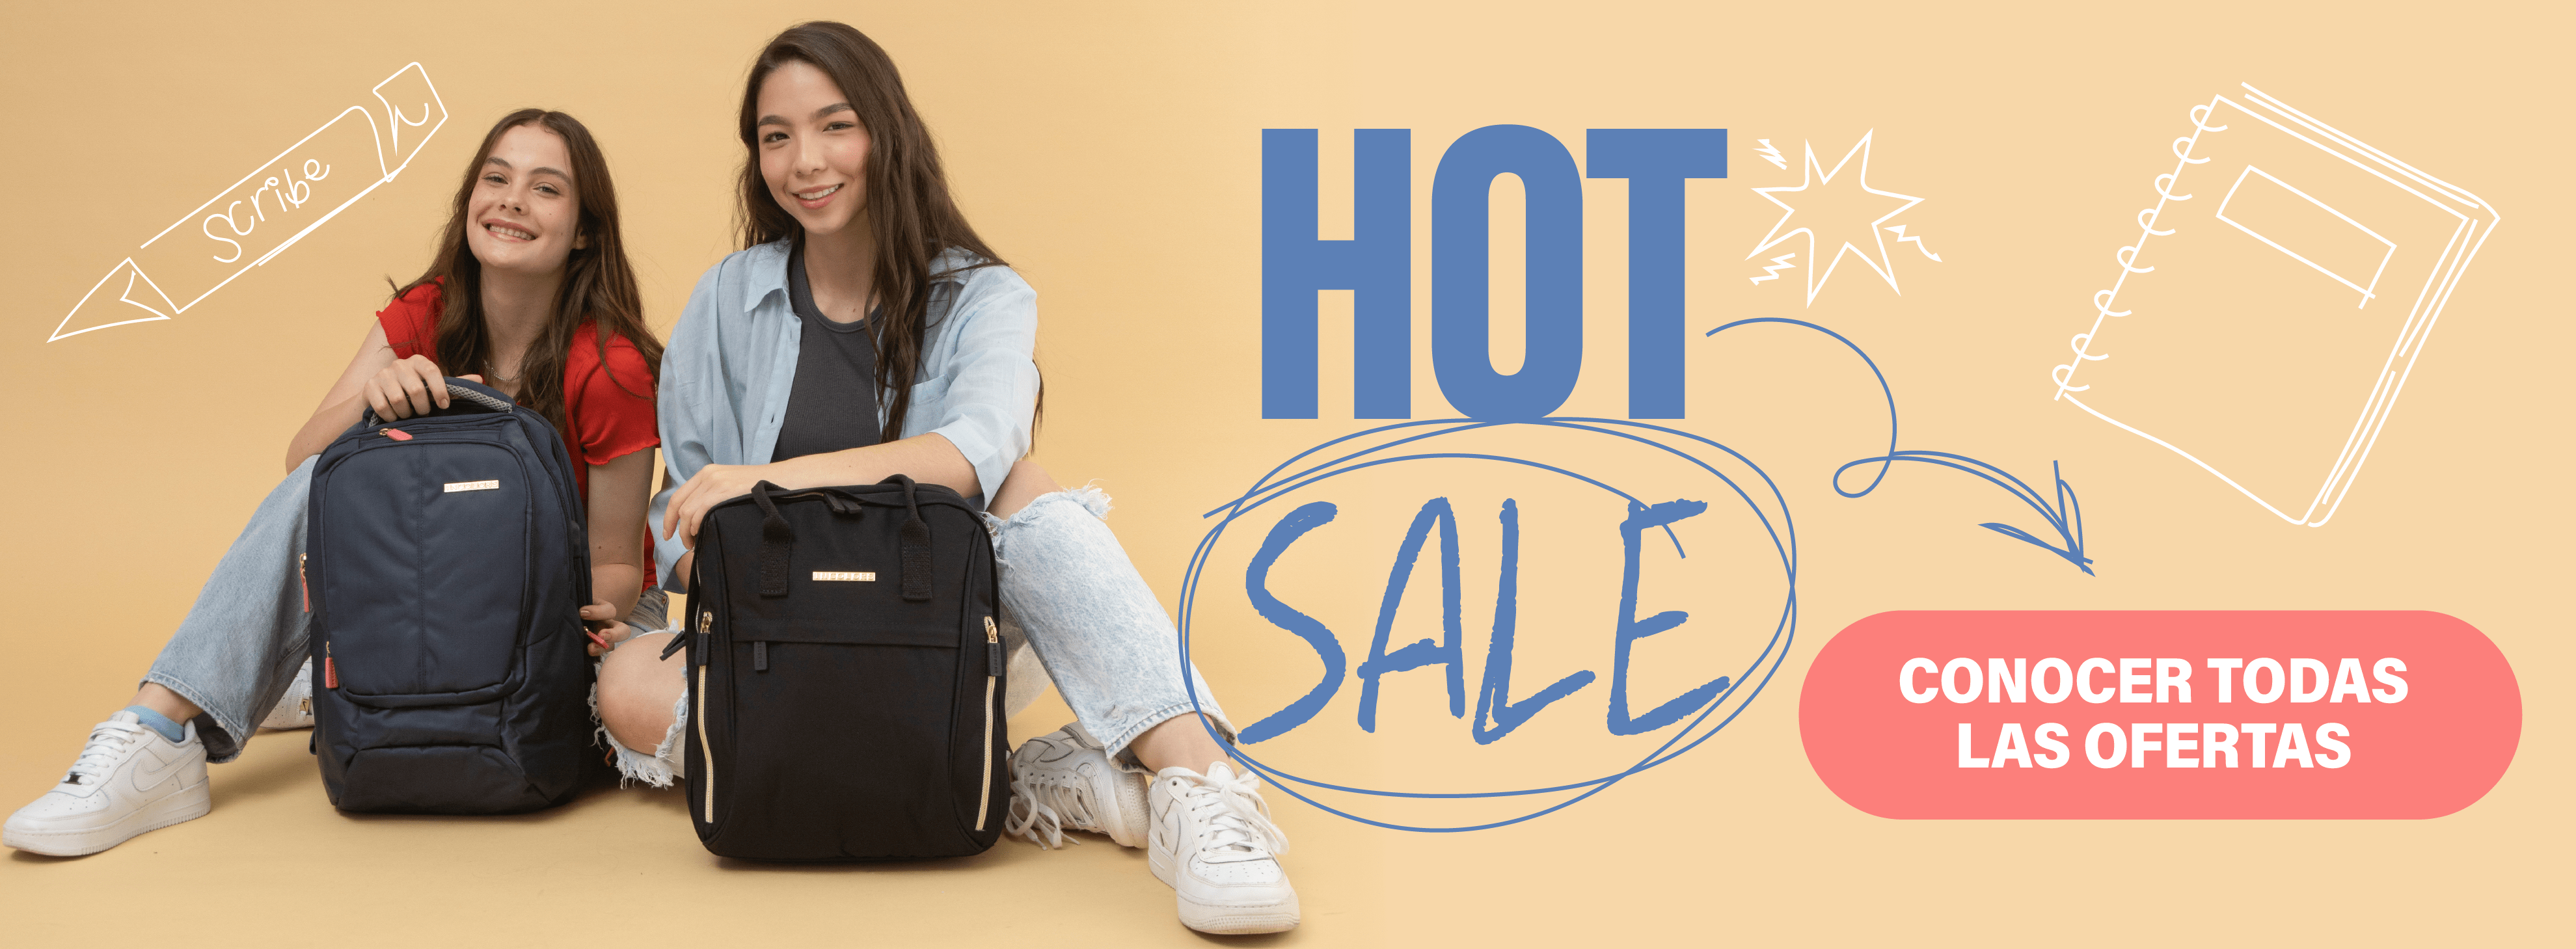 banner-hot-sale-marzo